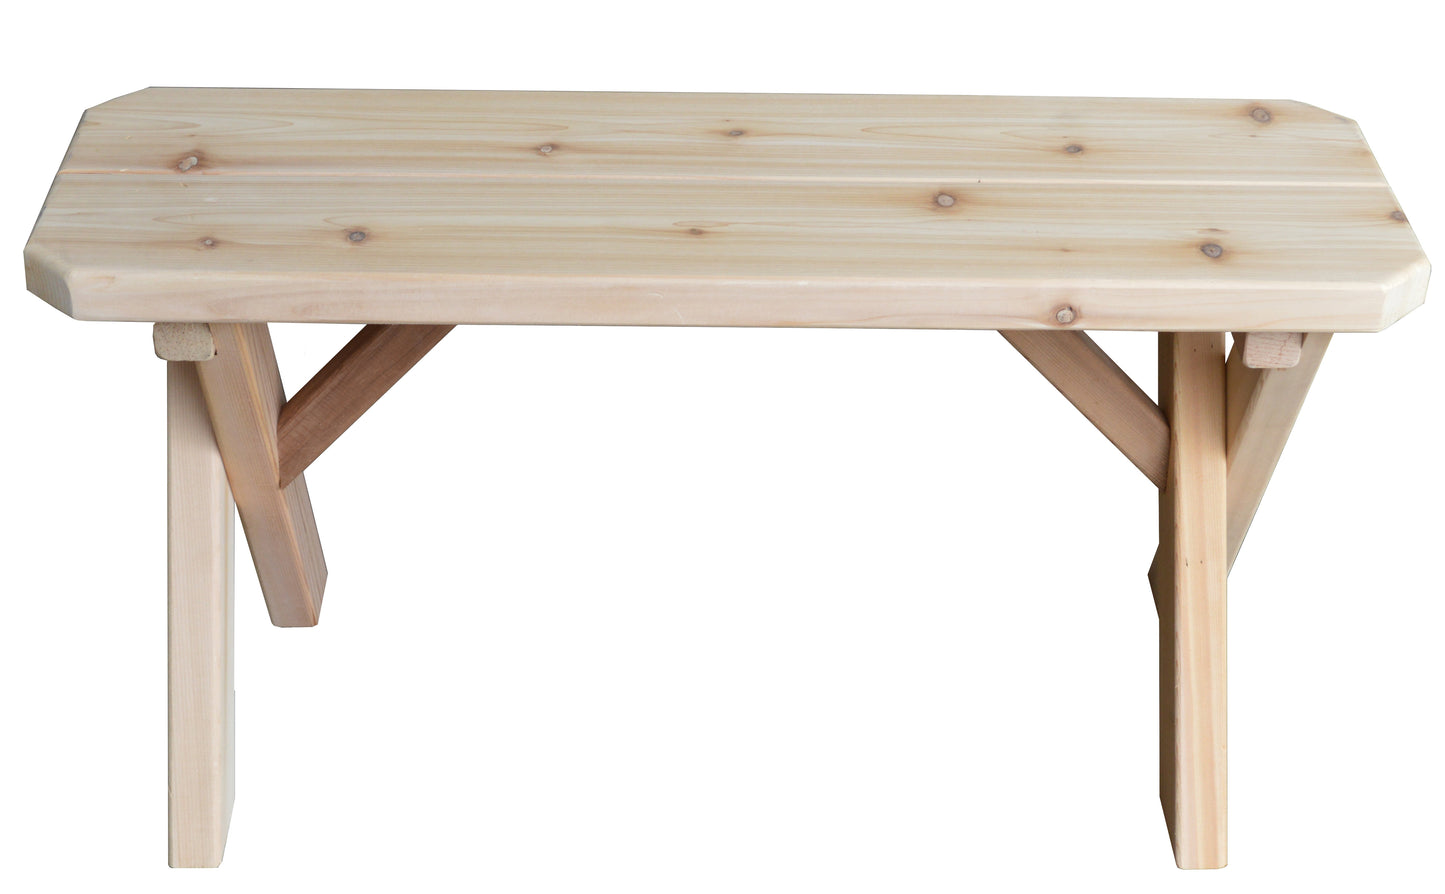 A&L FURNITURE CO. Western Red Cedar 23" Traditional Bench Only - LEAD TIME TO SHIP 2 WEEKS